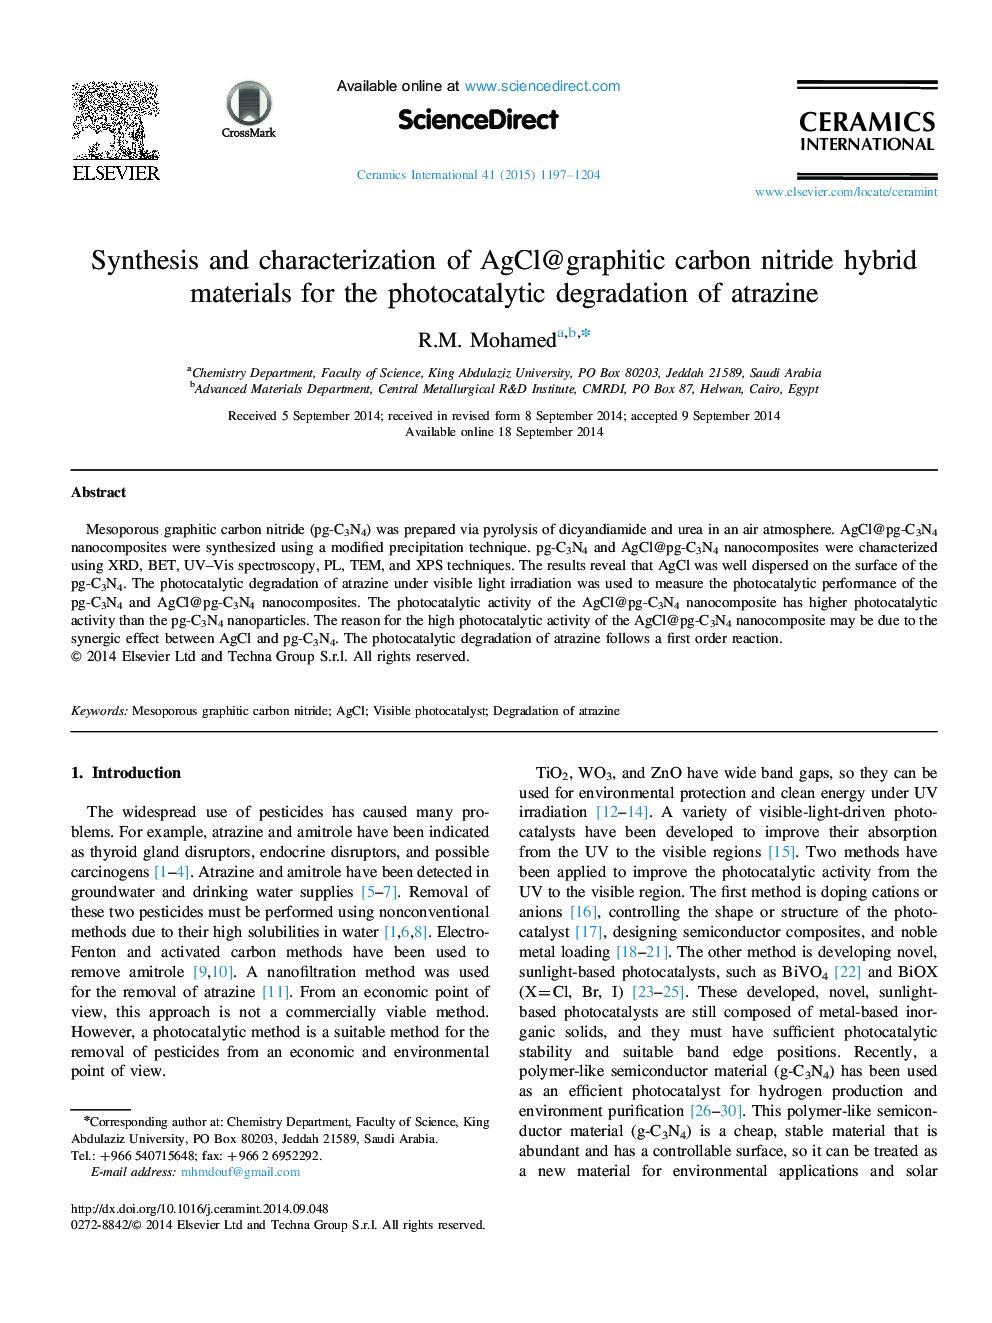 Synthesis and characterization of AgCl@graphitic carbon nitride hybrid materials for the photocatalytic degradation of atrazine